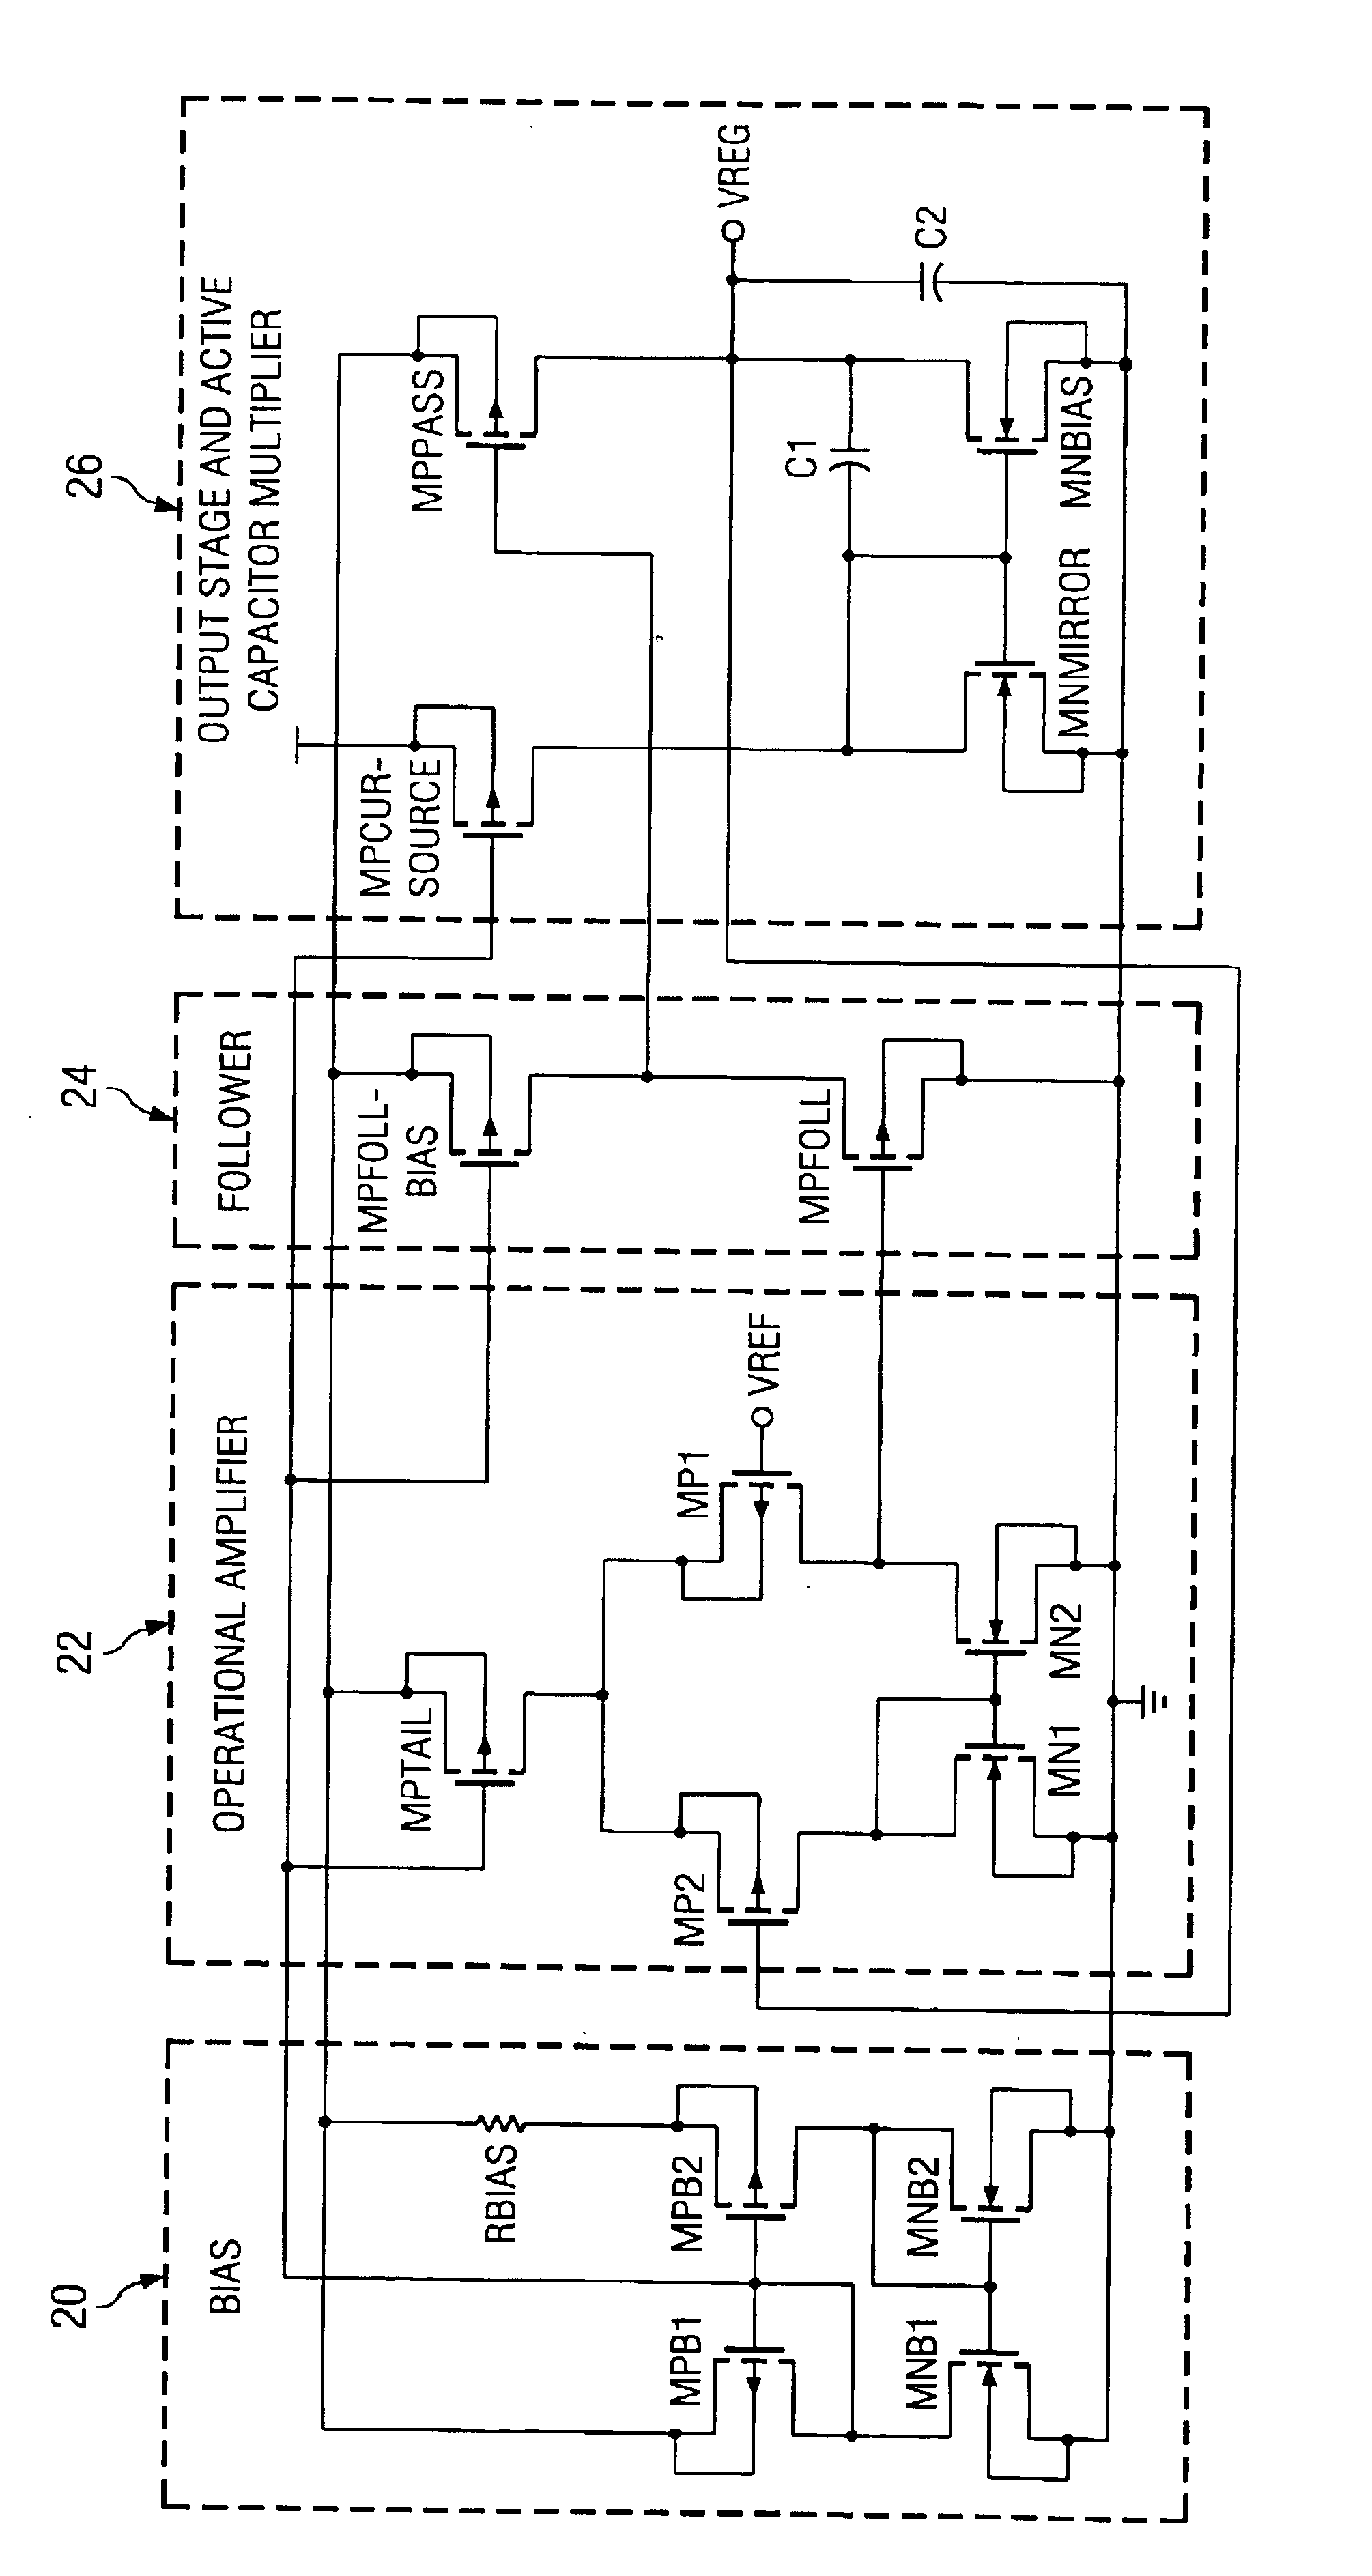 Low dropout monolithic linear regulator having wide operating load range